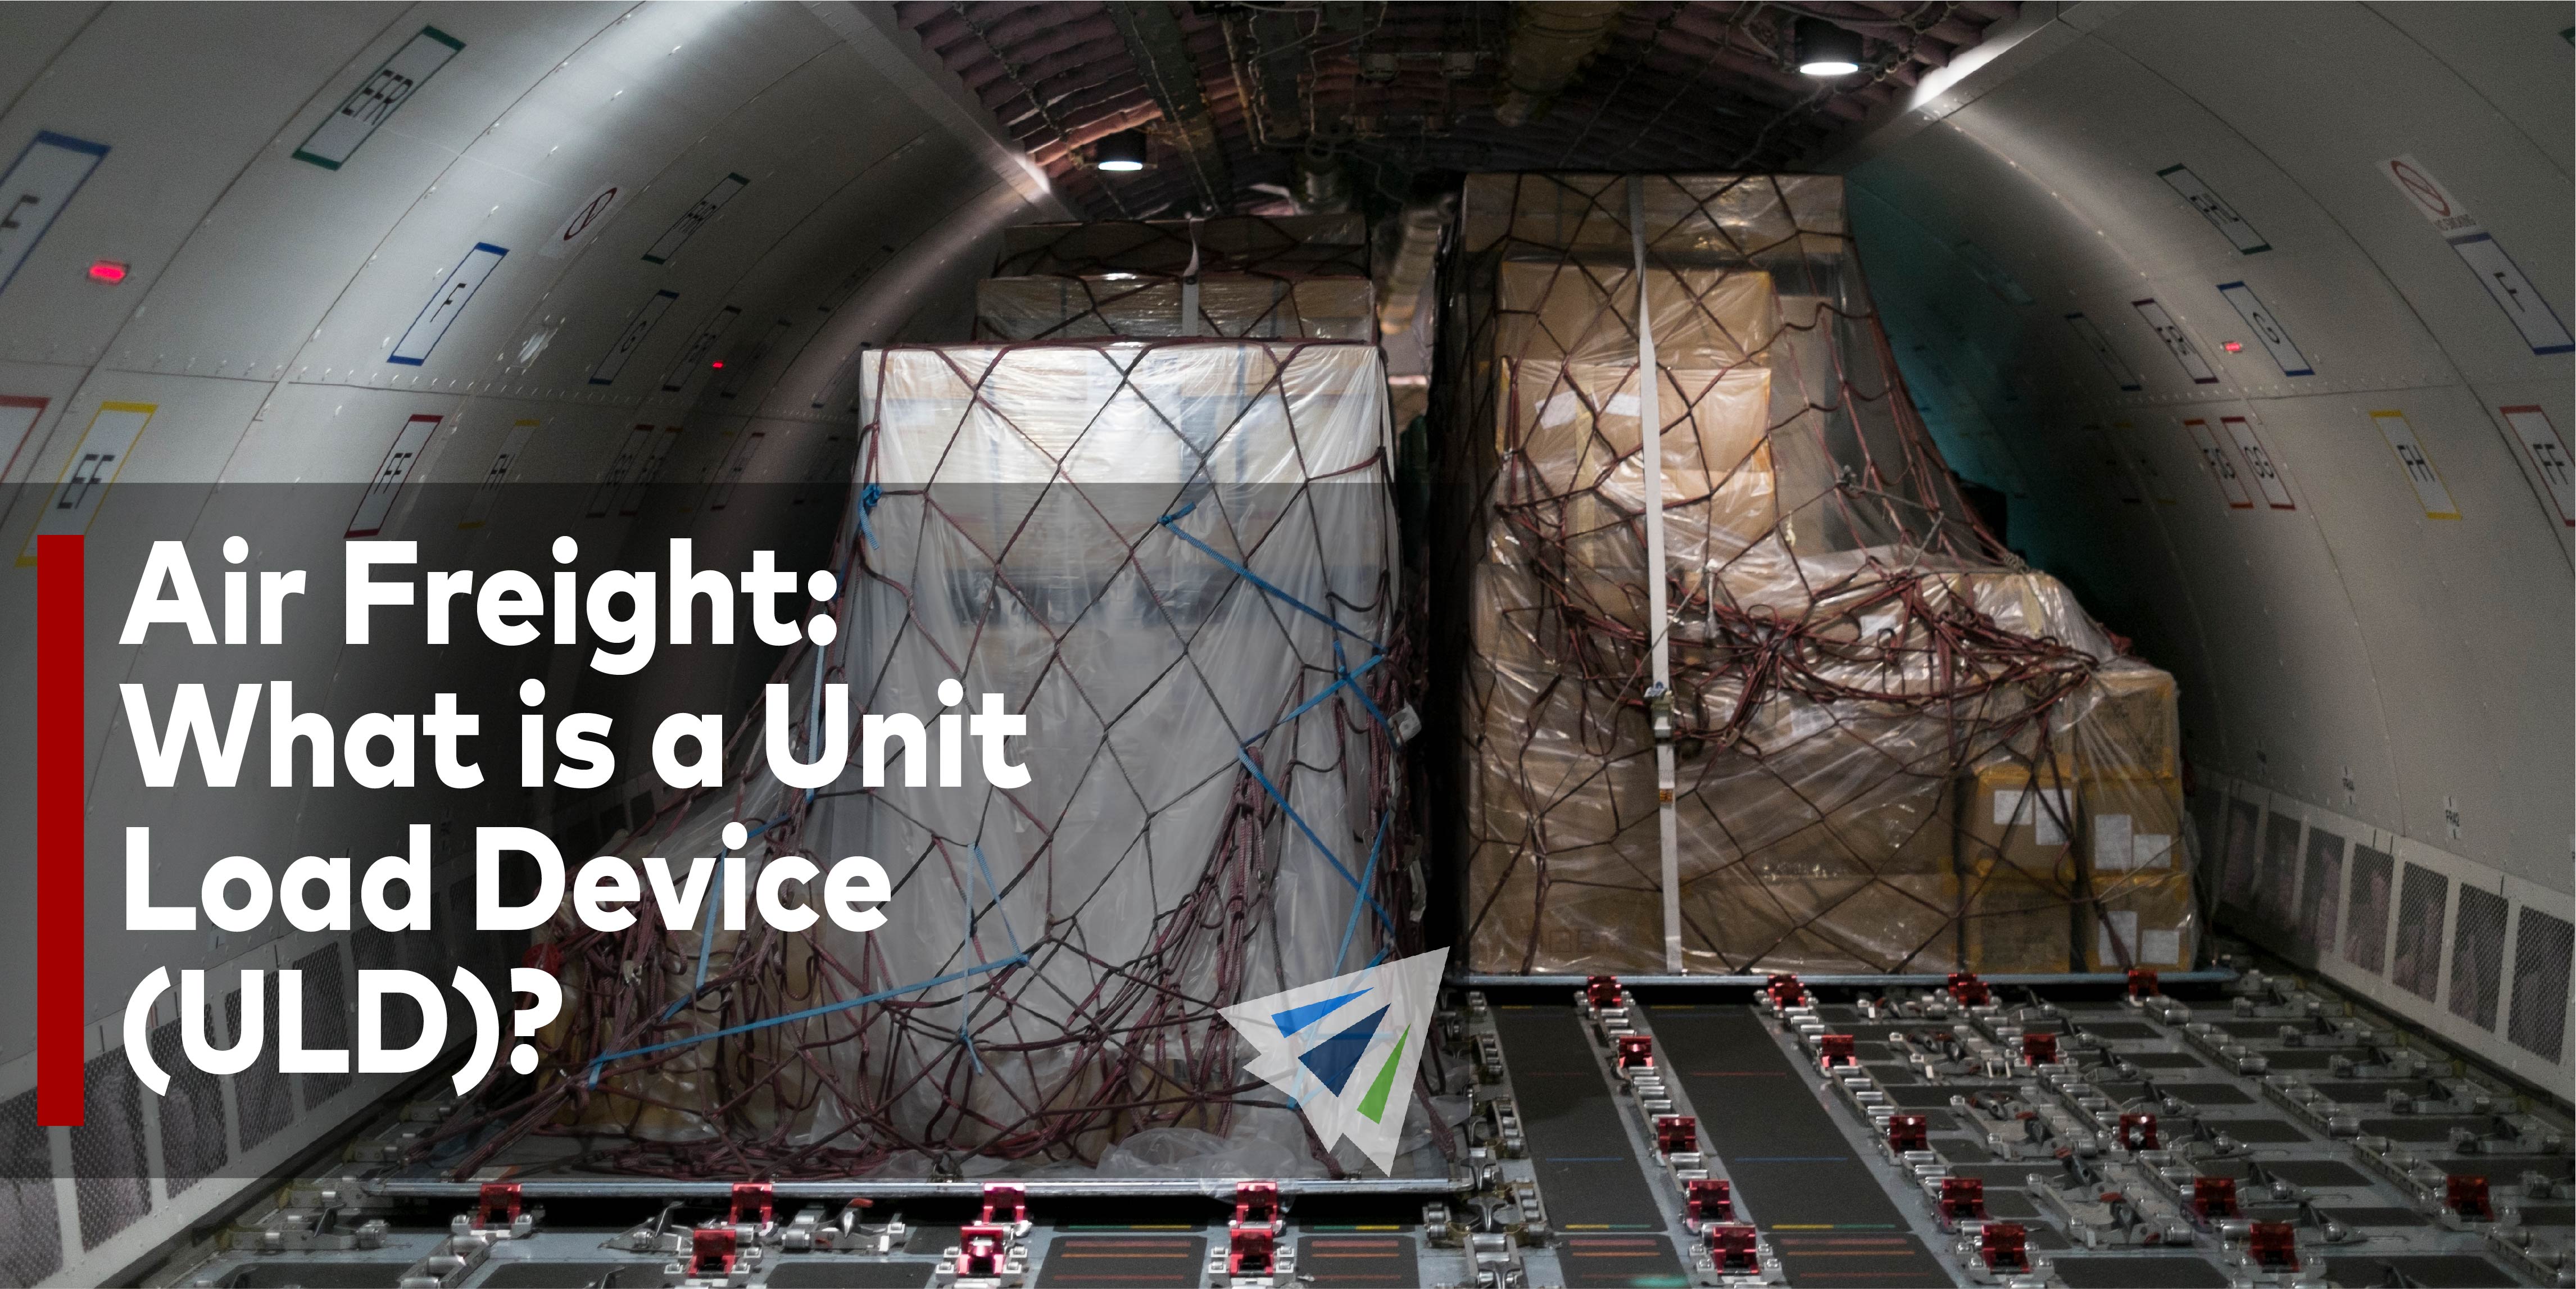 Air Freight: What is a Unit Load Device (ULD)?